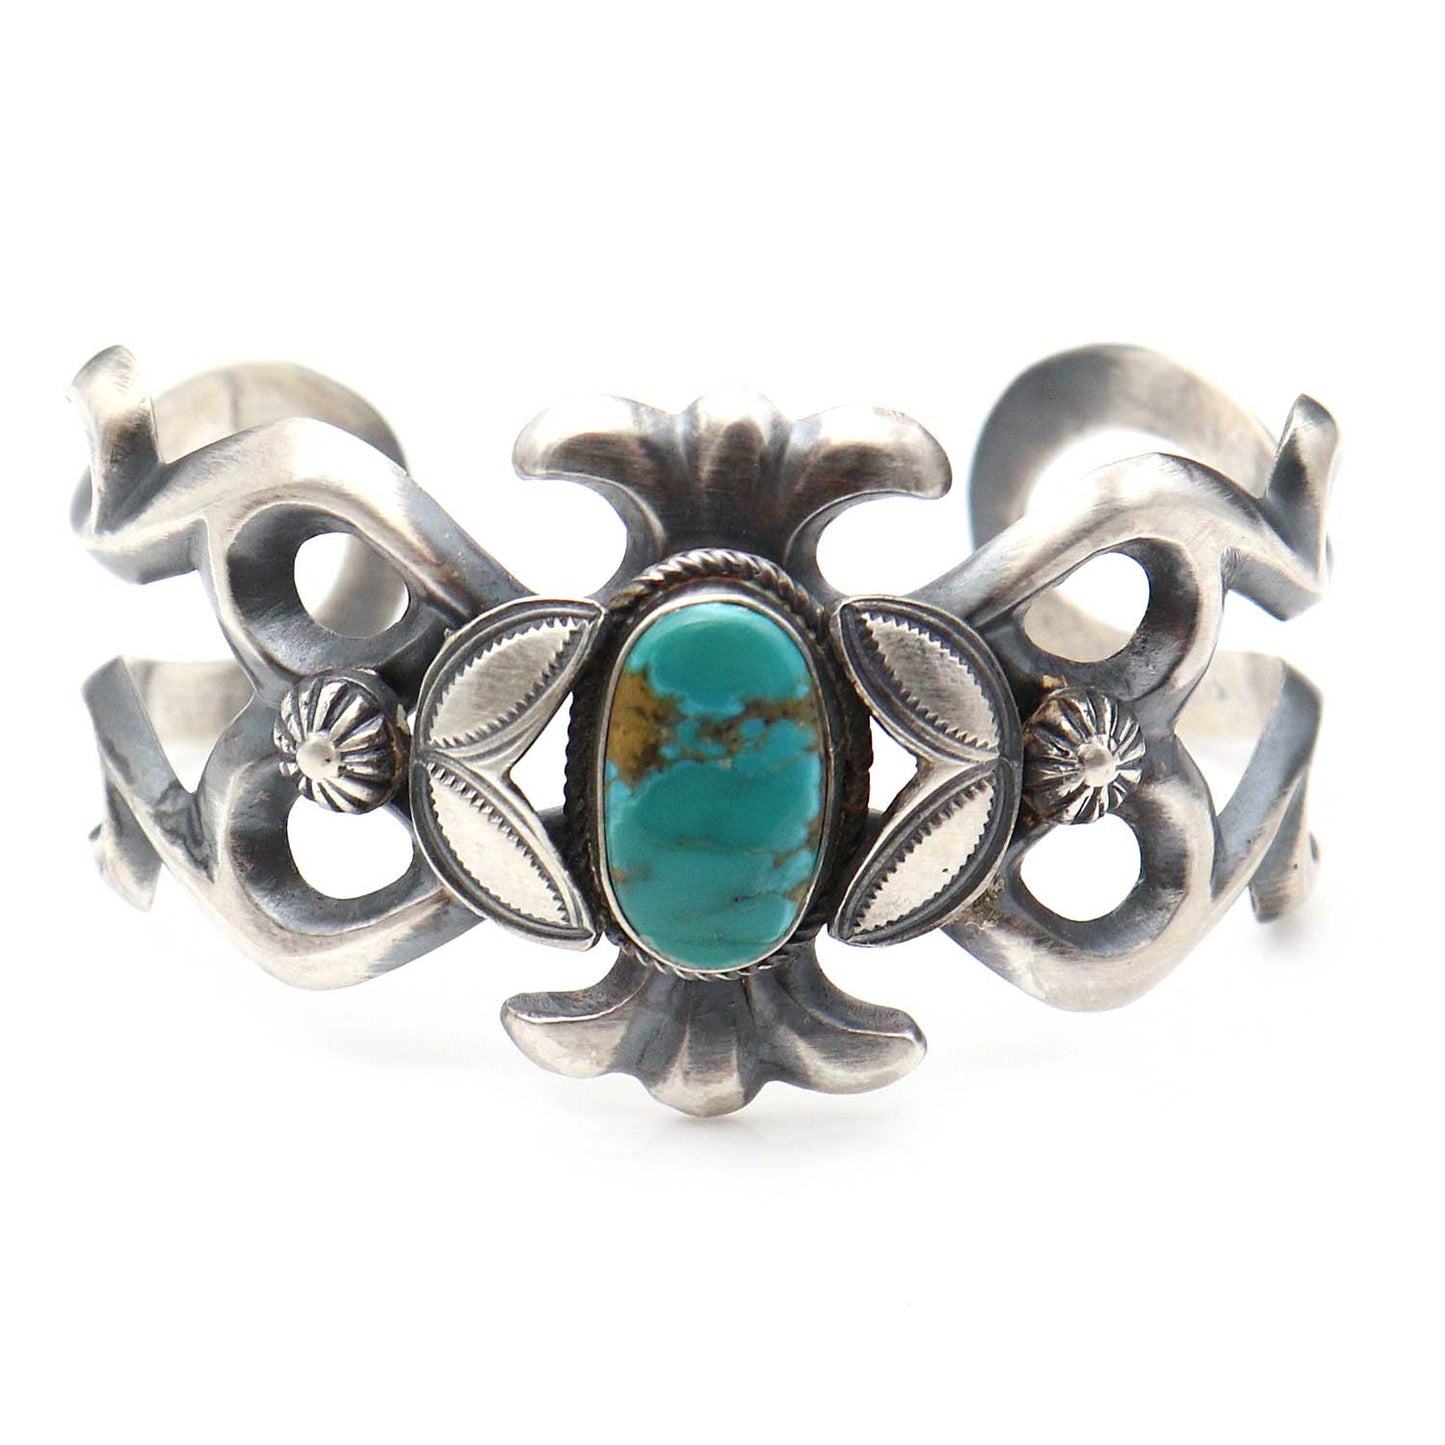 Cast Turquoise & Silver Bracelet by Henry Morgan